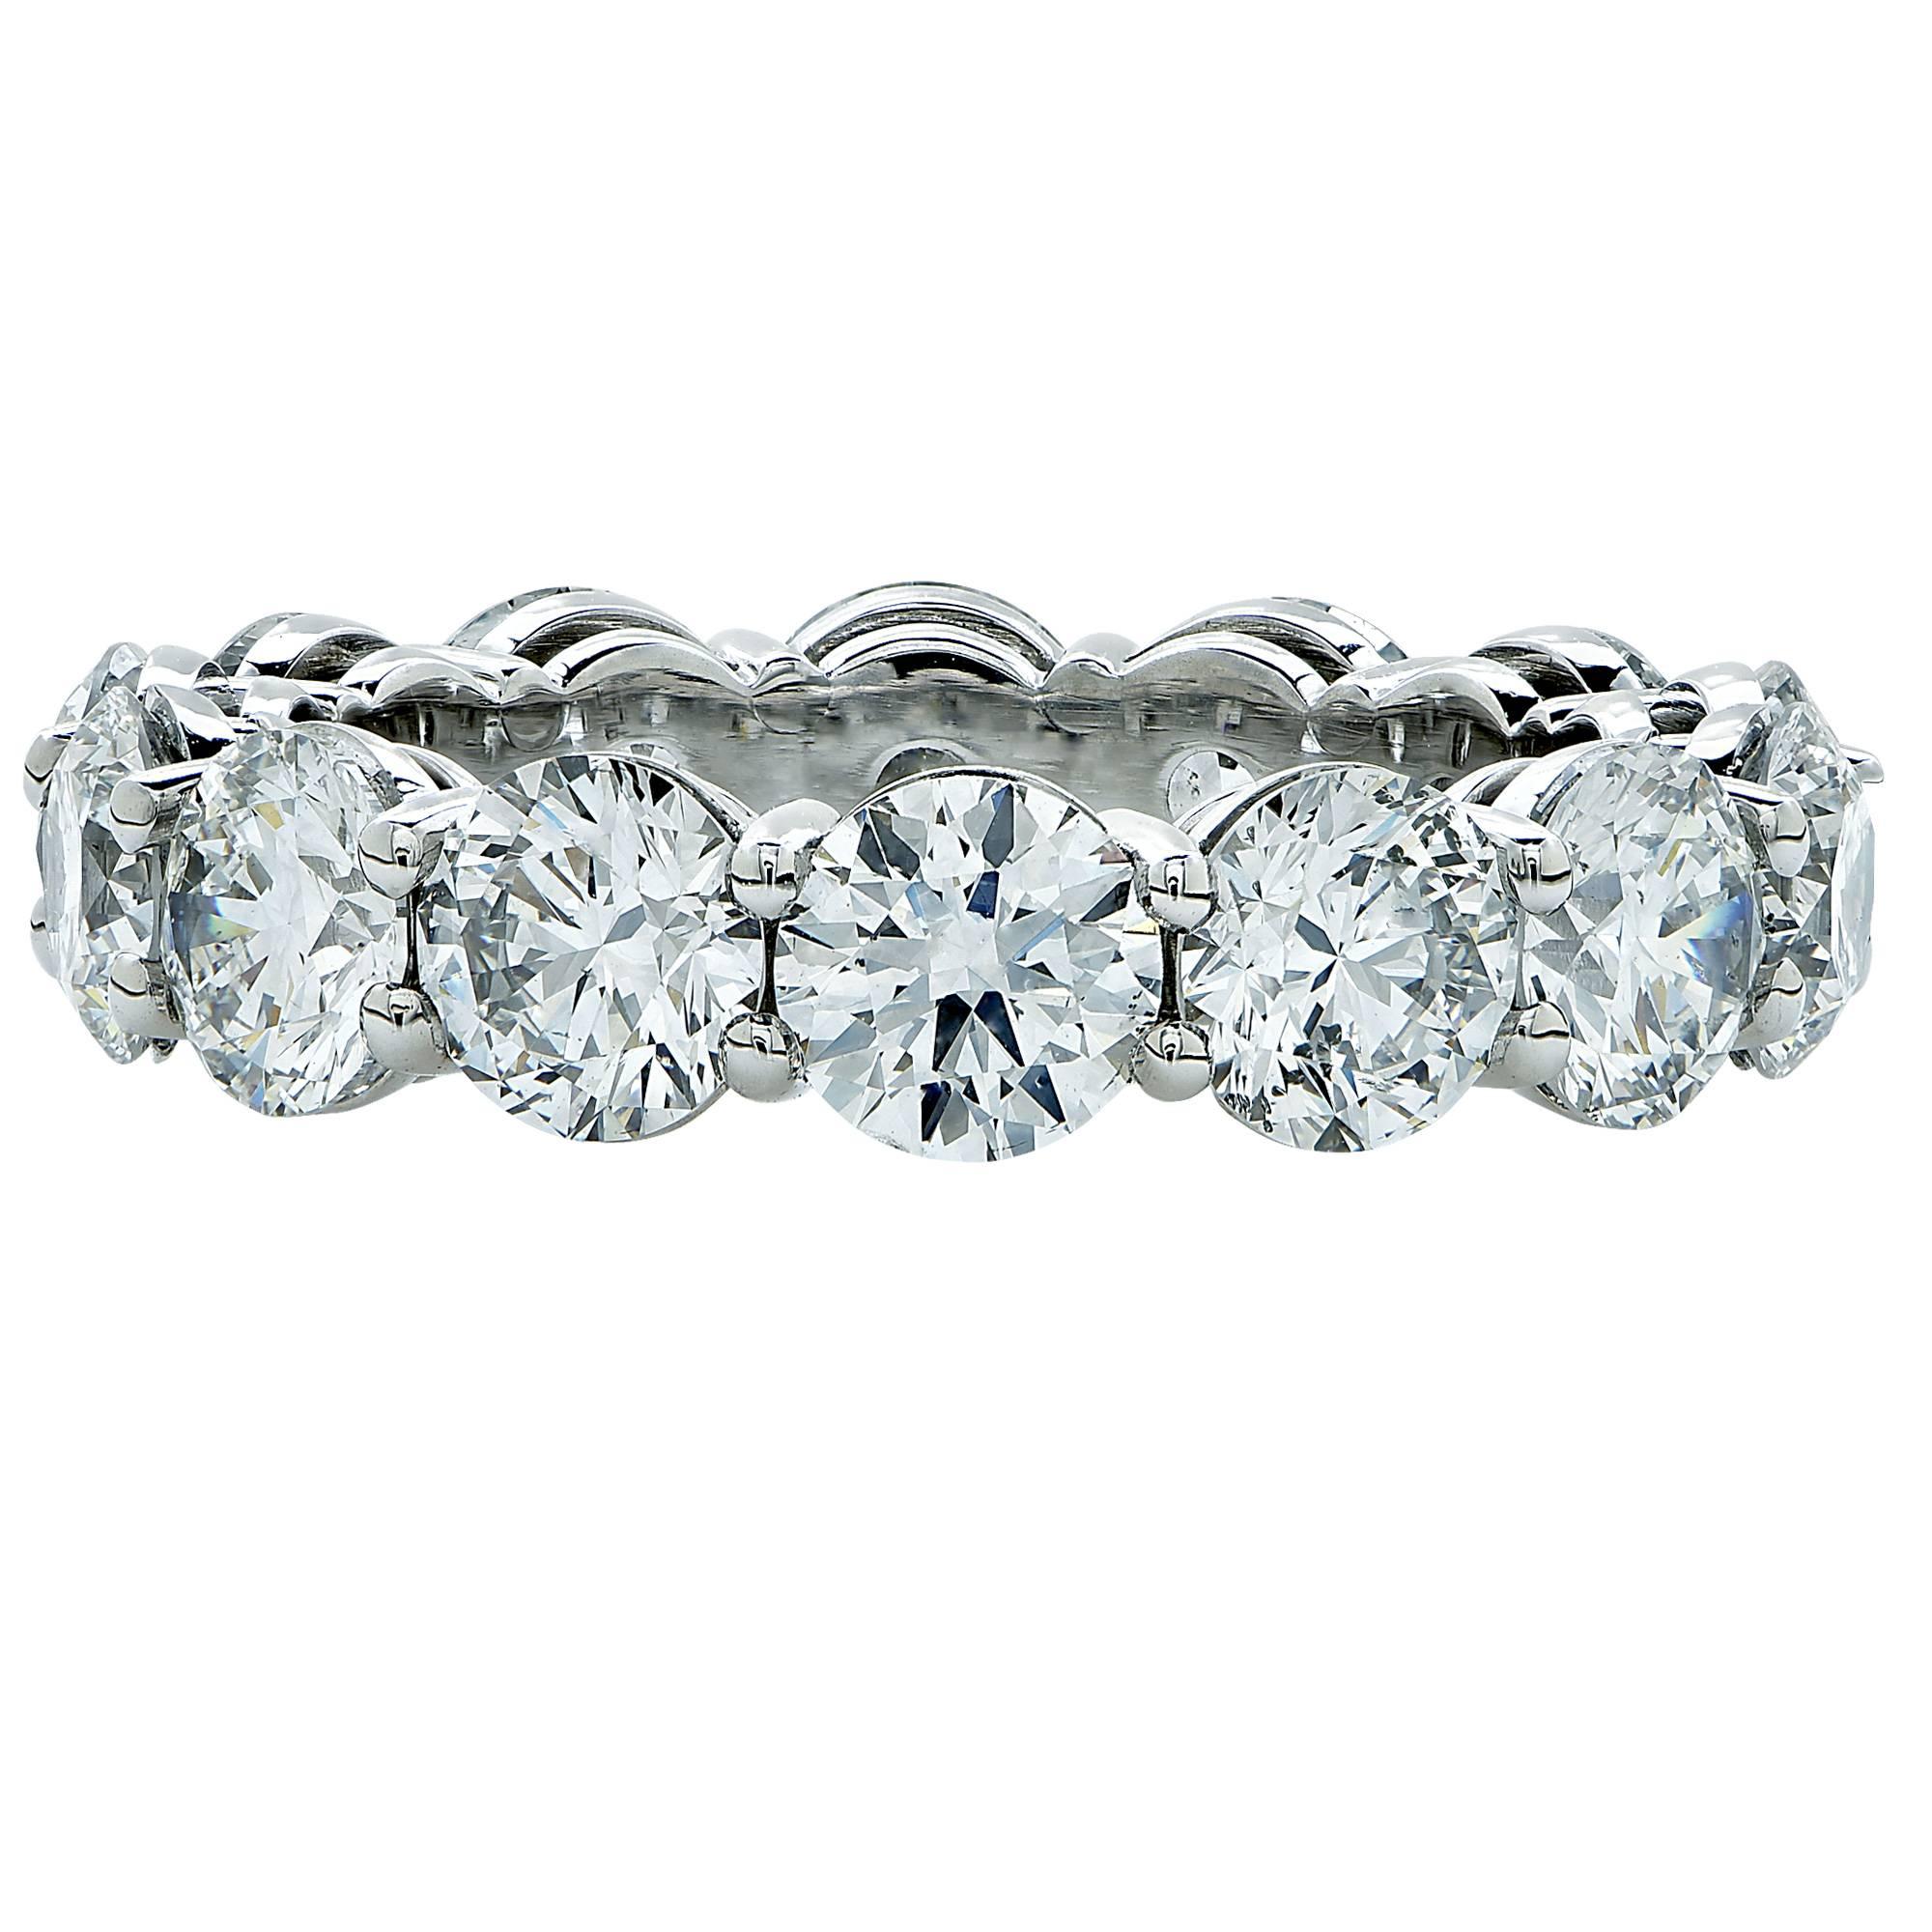 Hand made platinum open gallery shared prong eternity band containing 14 round brilliant cut diamonds weighing 5.62ct D-F color and VS2-SI2 clarity. All diamonds are accompanied by GIA reports.

The ring is a size 6 and can be sized up or